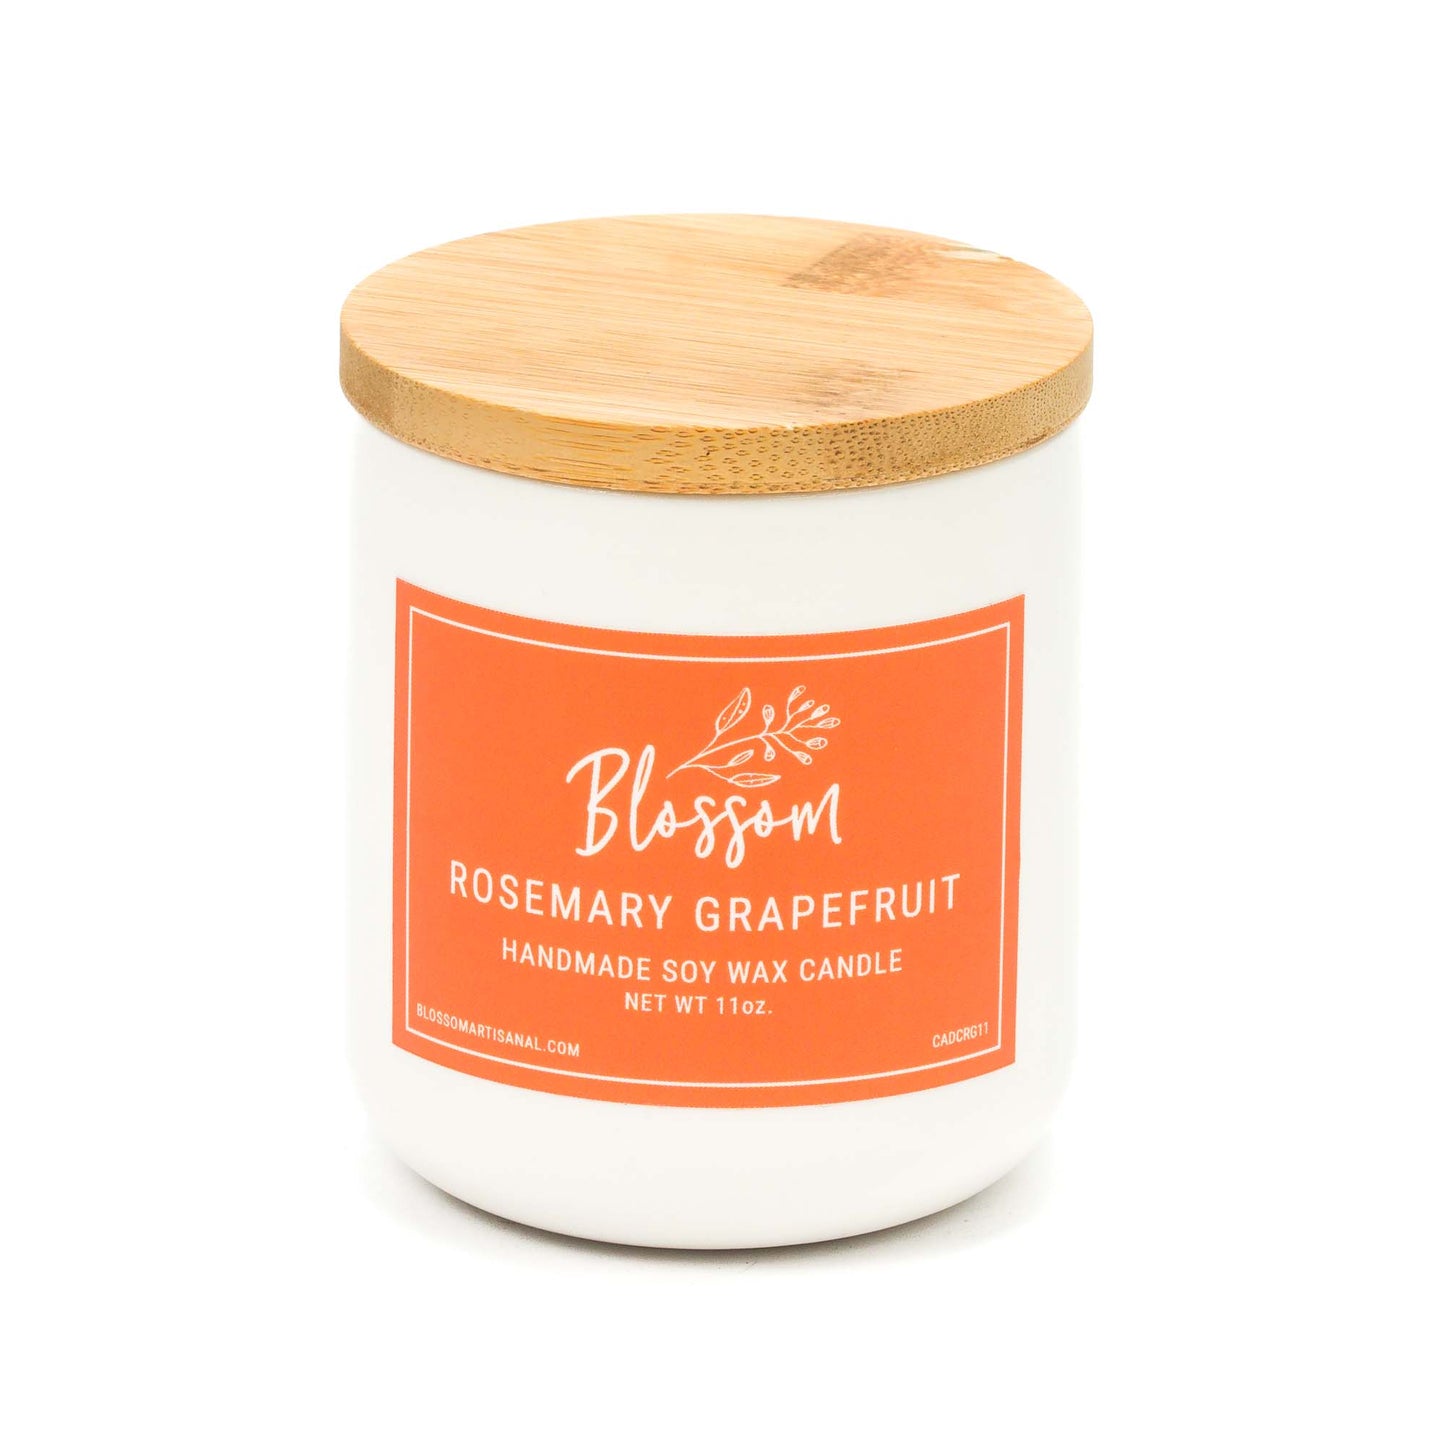 White Ceramic Decorative Soy Wax Candle Essential Oil Scent 8oz Rosemary Grapefruit